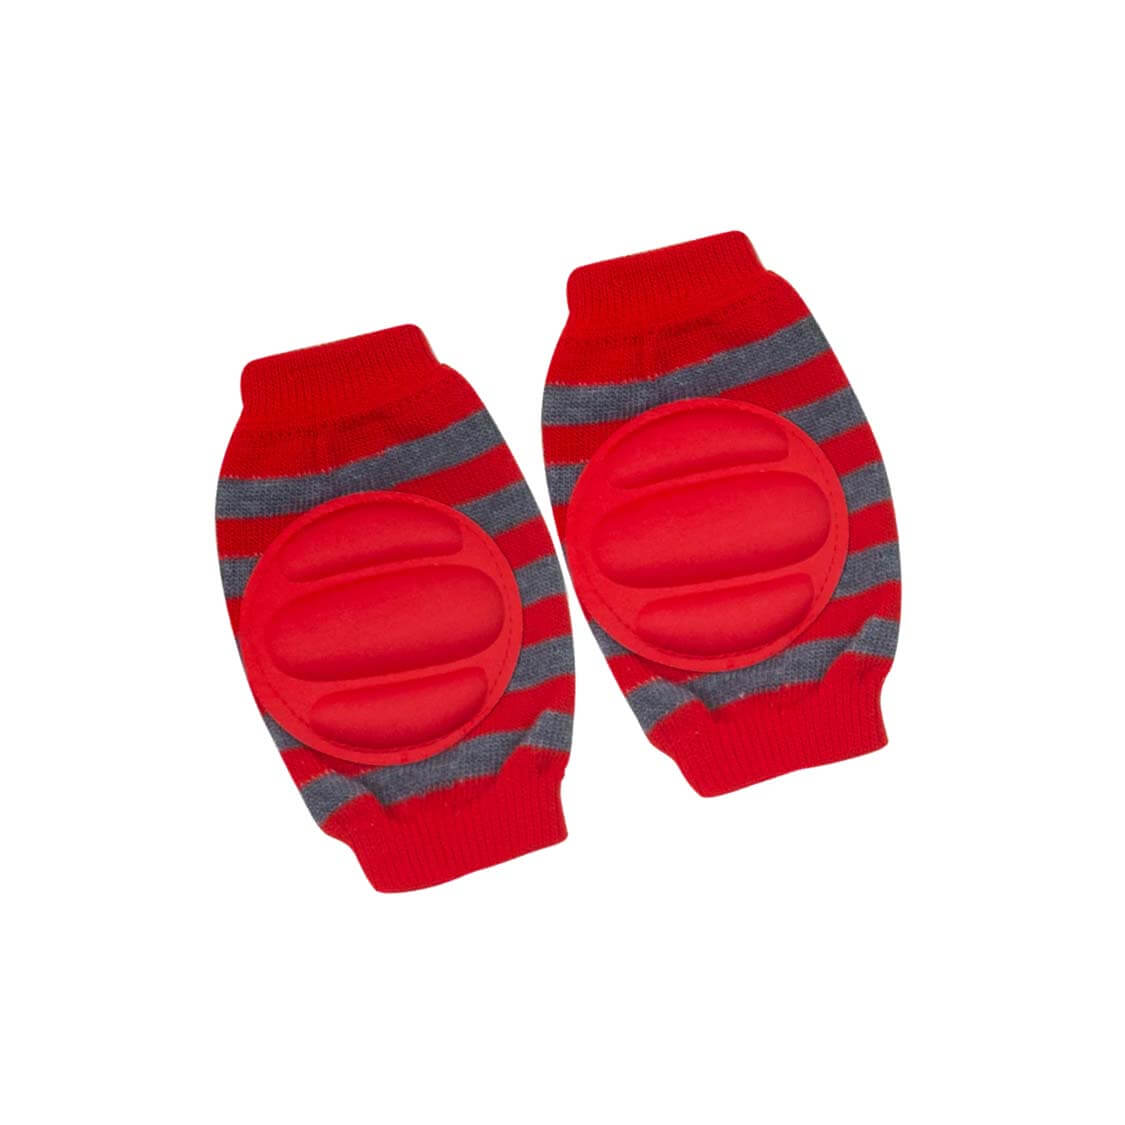 Stripped Red & Gray Baby Knee Protection Pads - BabyShark.pk | Shop ...